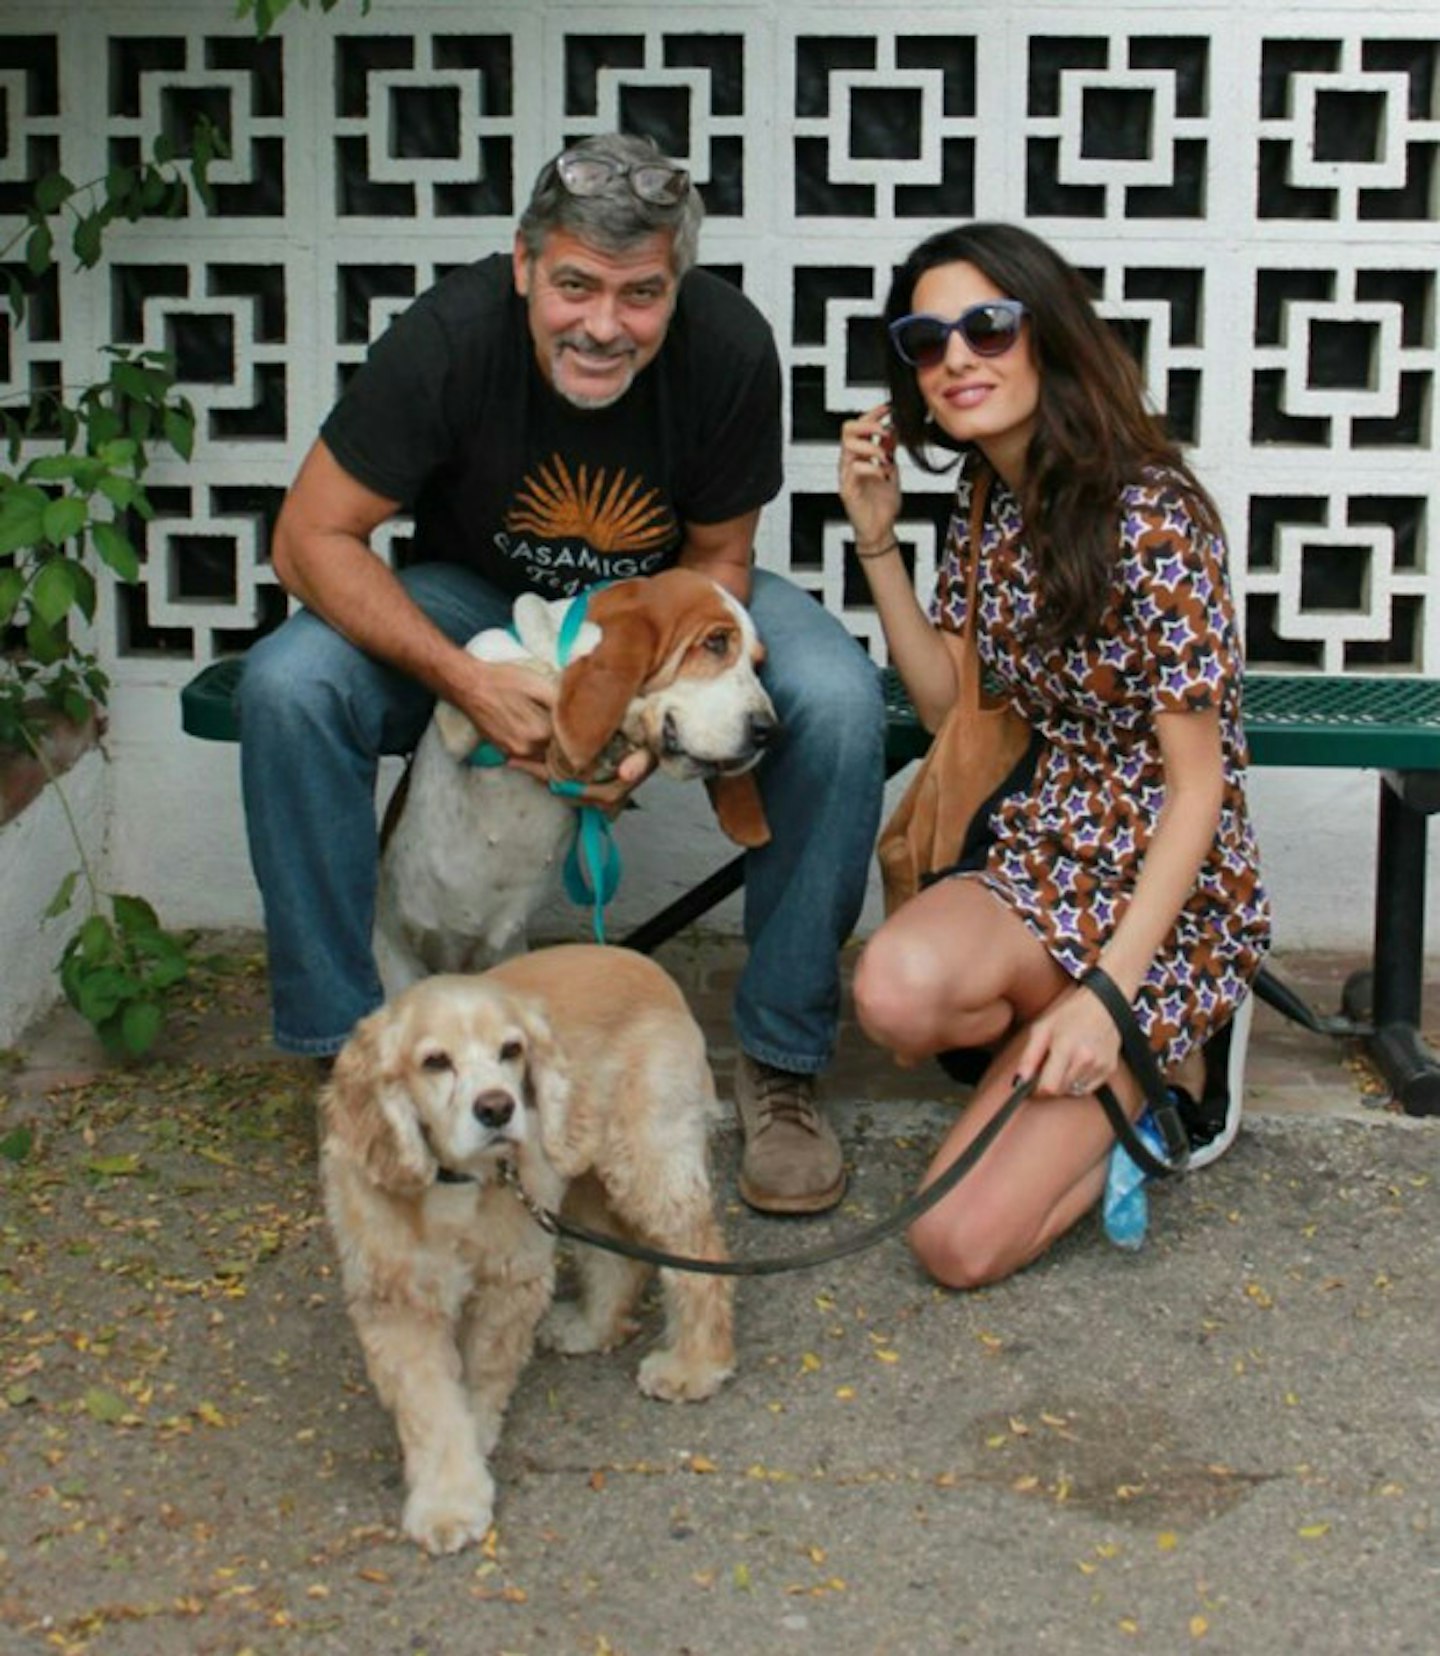 GEORGE CLOONEY AND WIFE AMAL